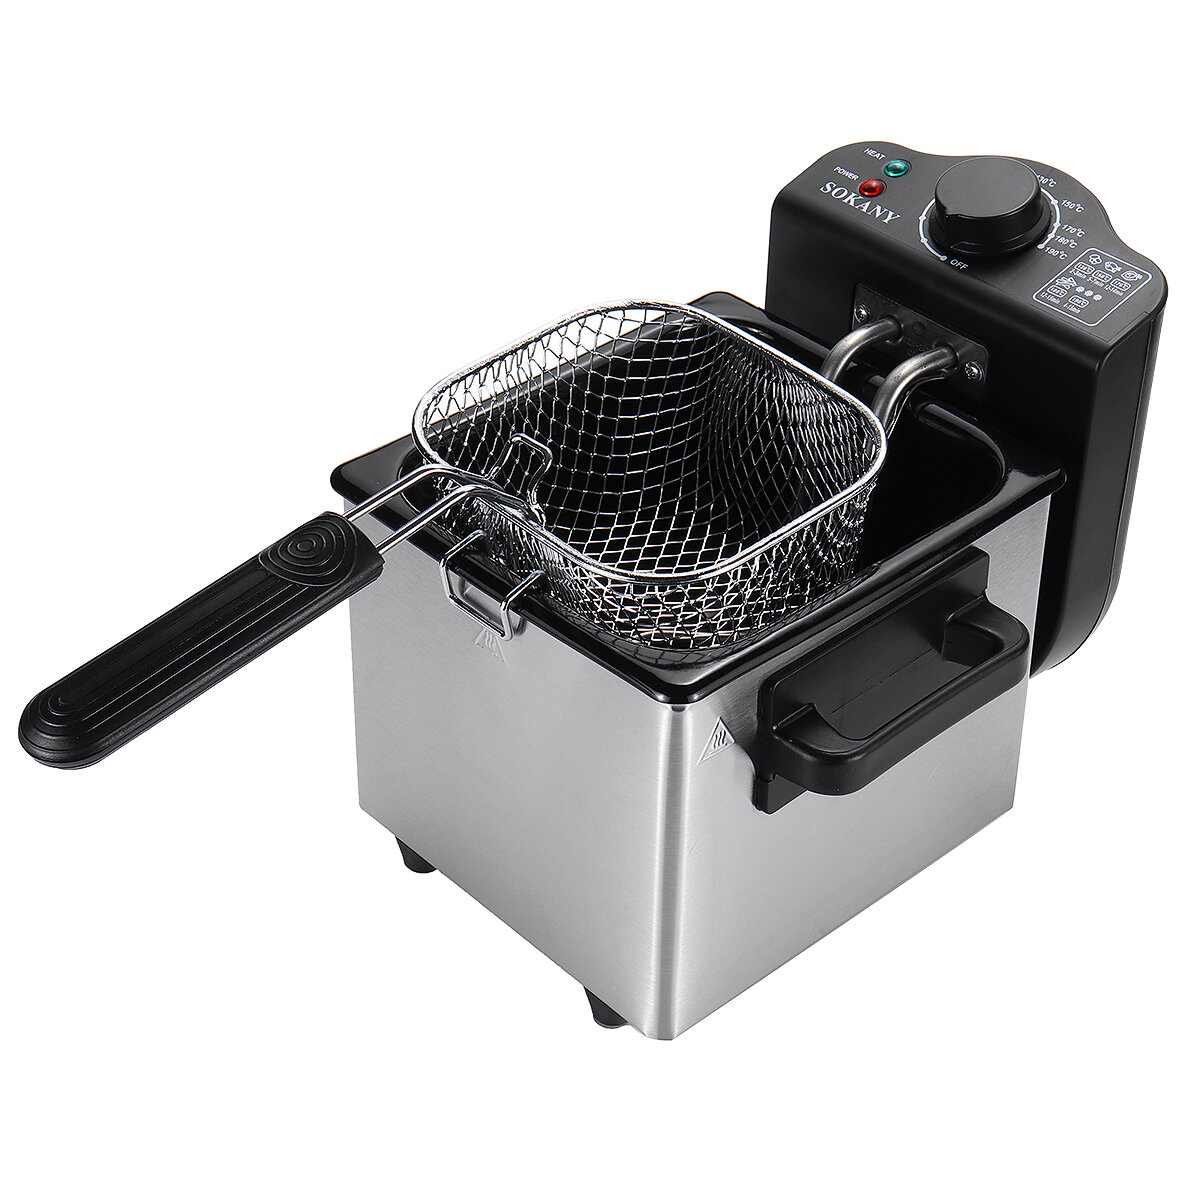 SOKANY WJ-804 Stainless Steel Electric Deep Fryer 1000W 1.5L Automatic Thermostatic Hot Oven Cooker, 6 Temperature Adjus